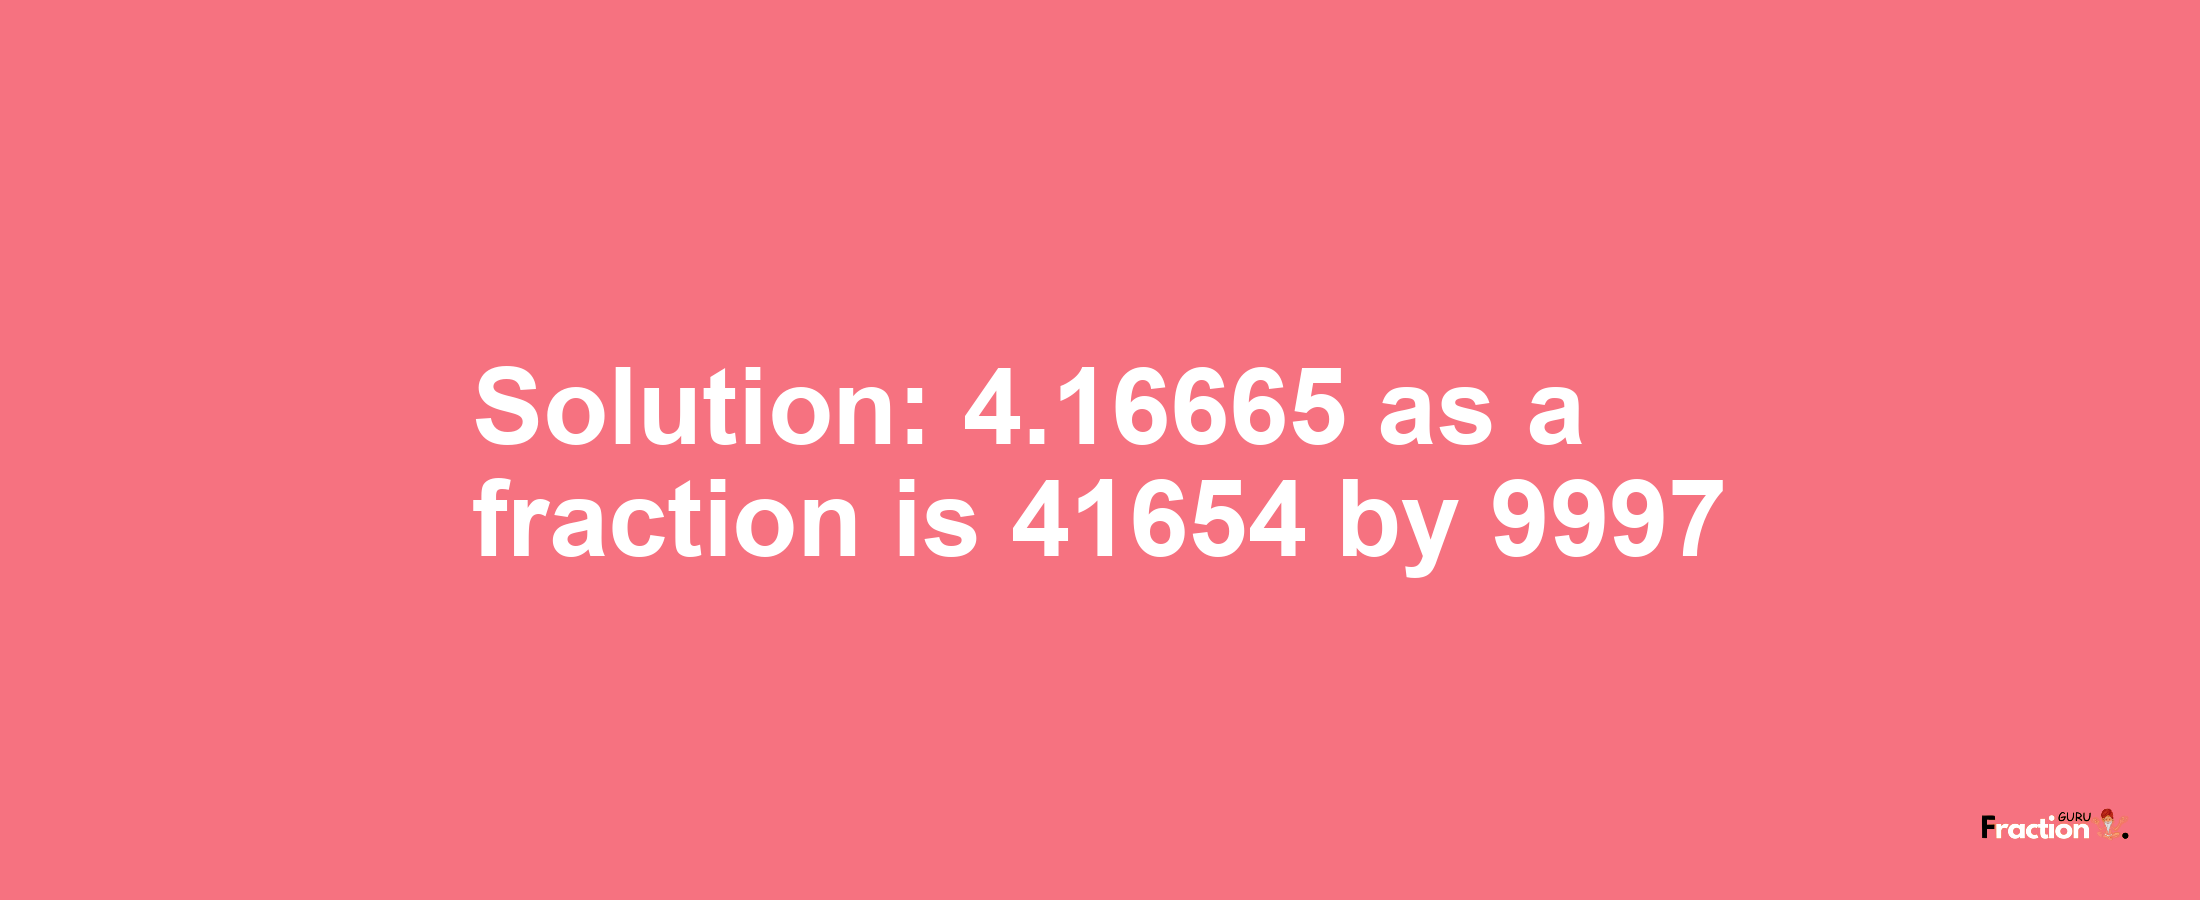 Solution:4.16665 as a fraction is 41654/9997